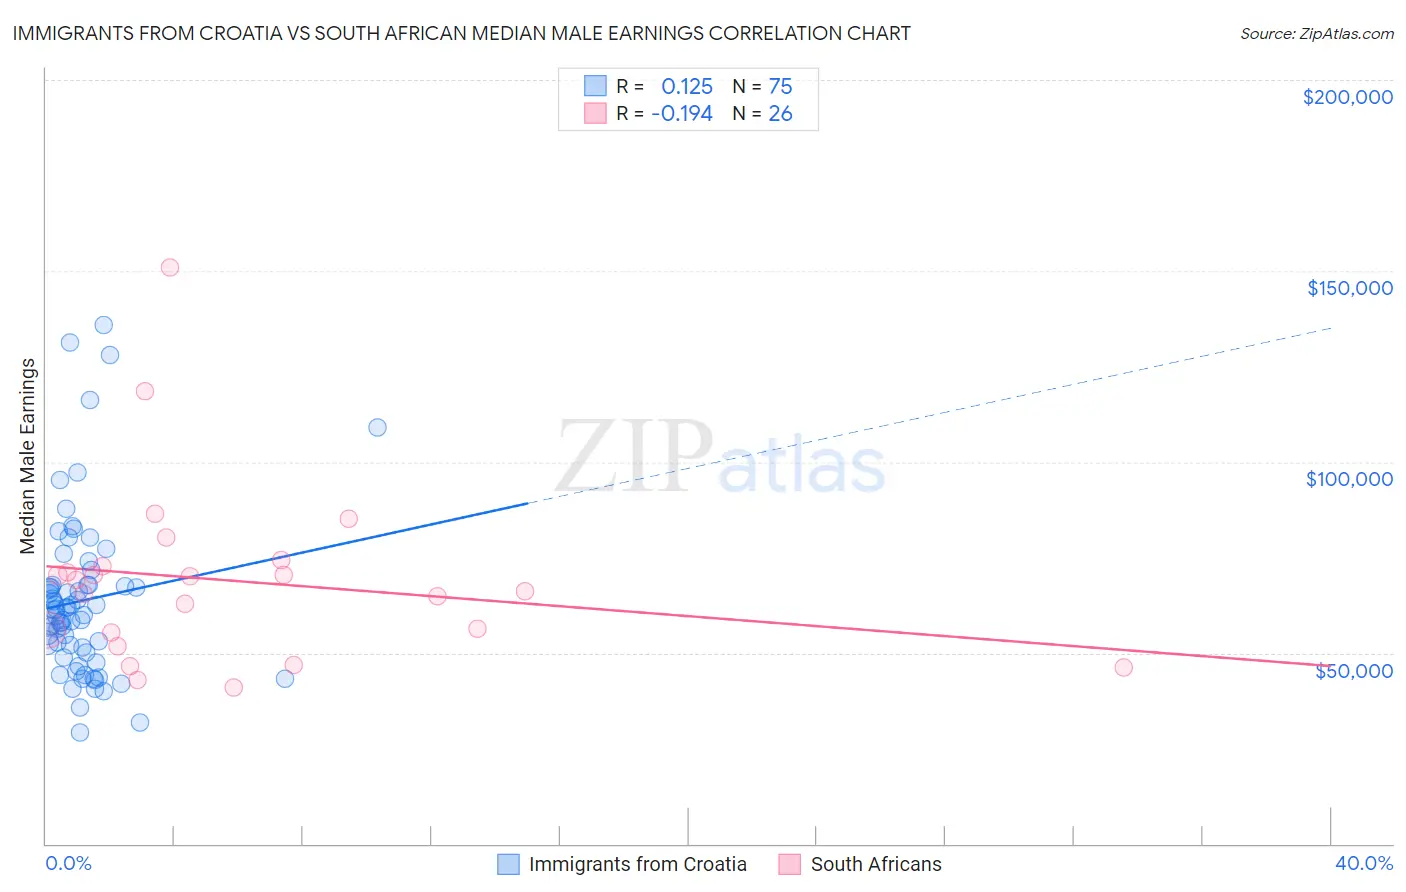 Immigrants from Croatia vs South African Median Male Earnings